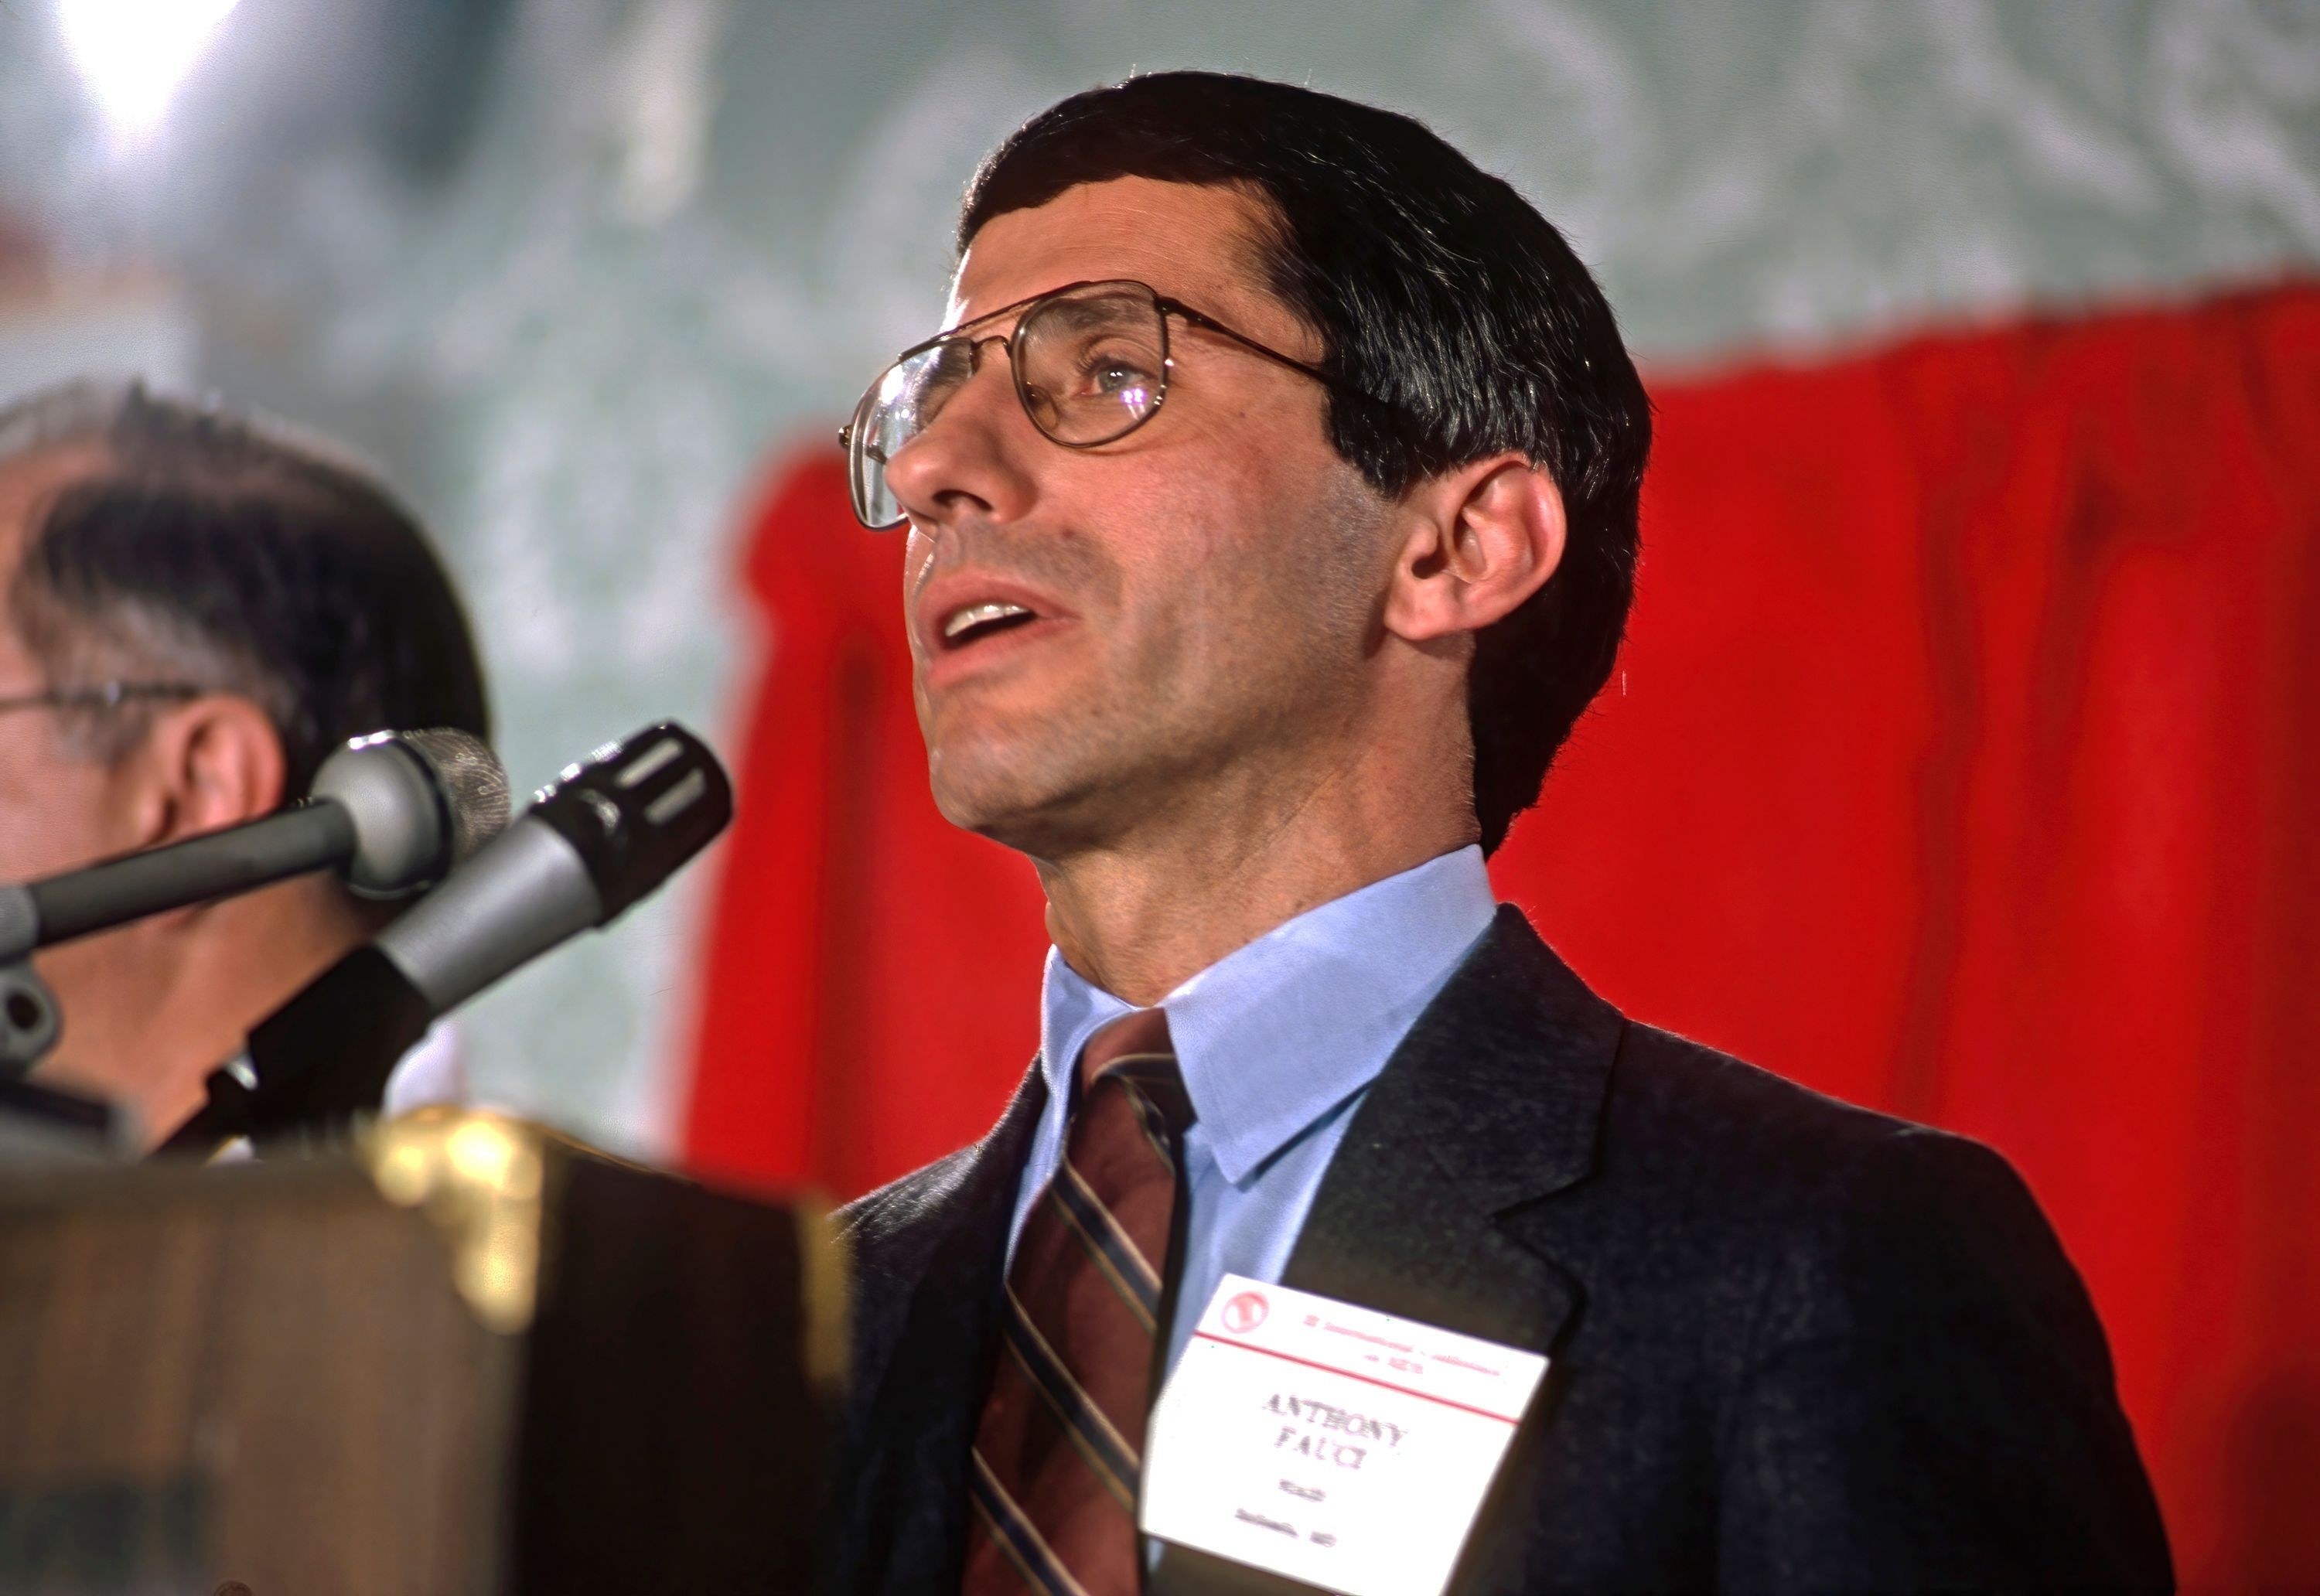 Anthony Fauci speaking at the III International AIDS Conference in Washington, DC, June 1987